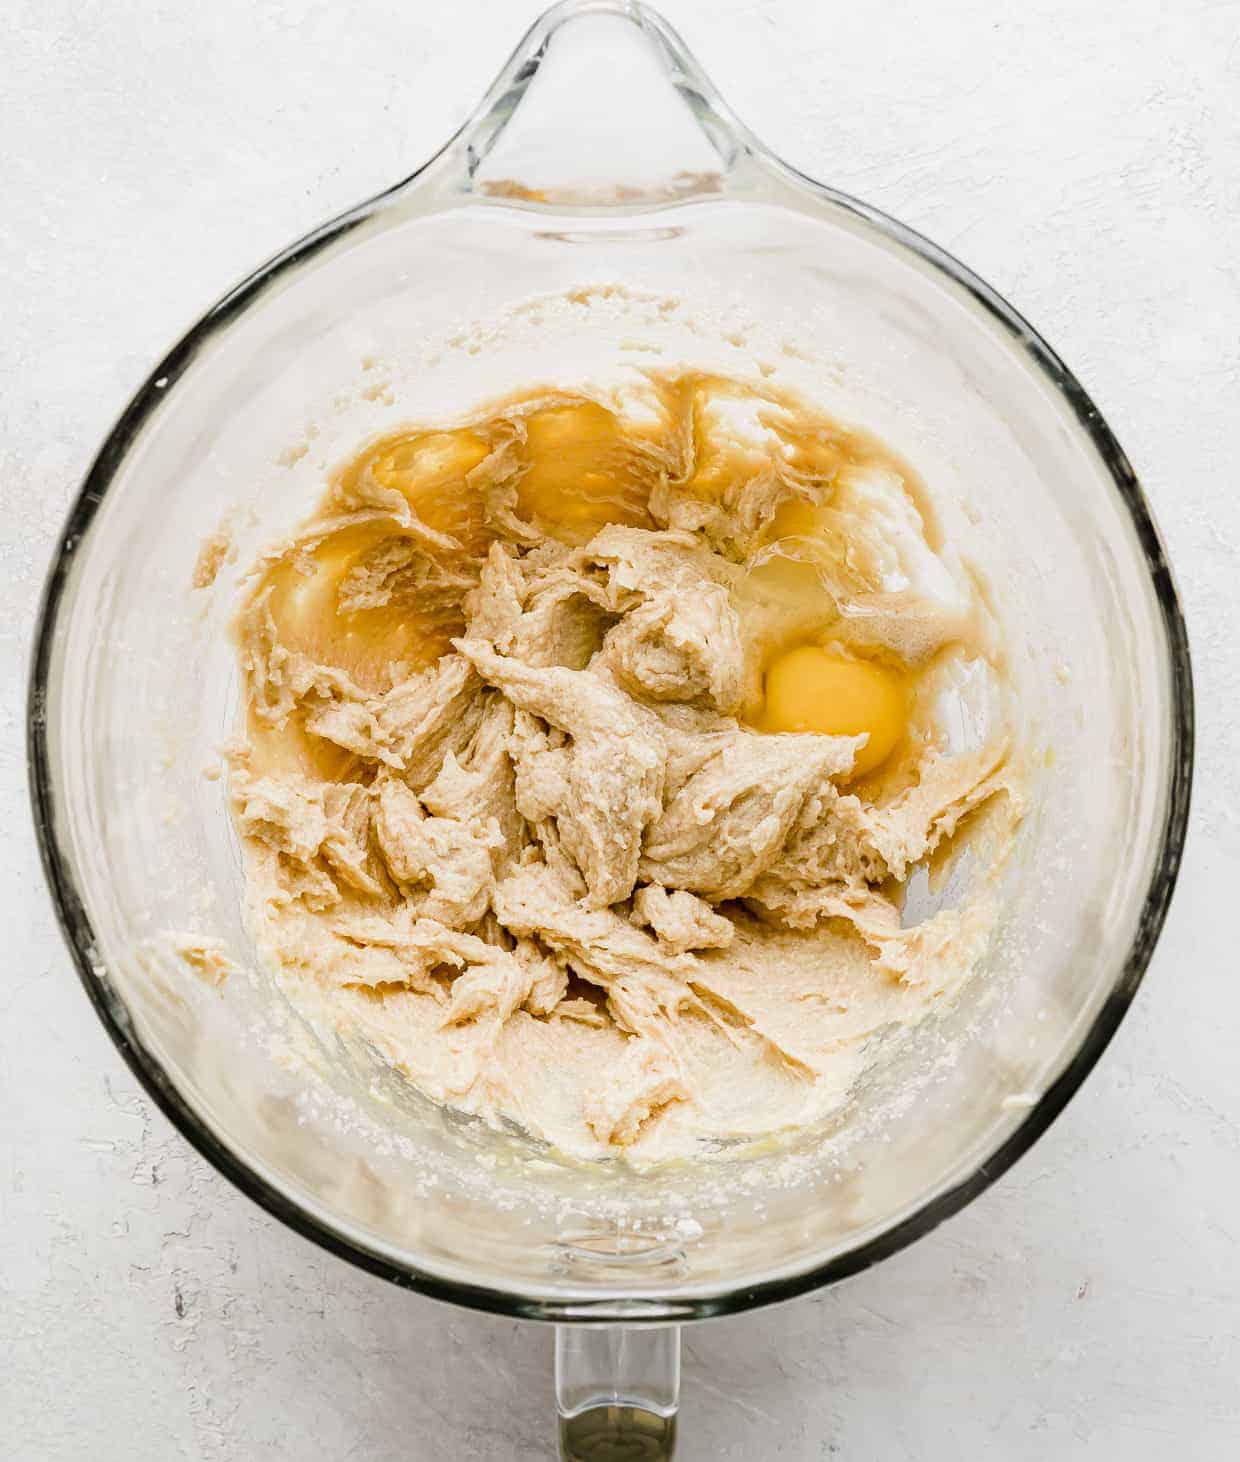 Creamed butter and sugar with cracked eggs in a glass bowl.